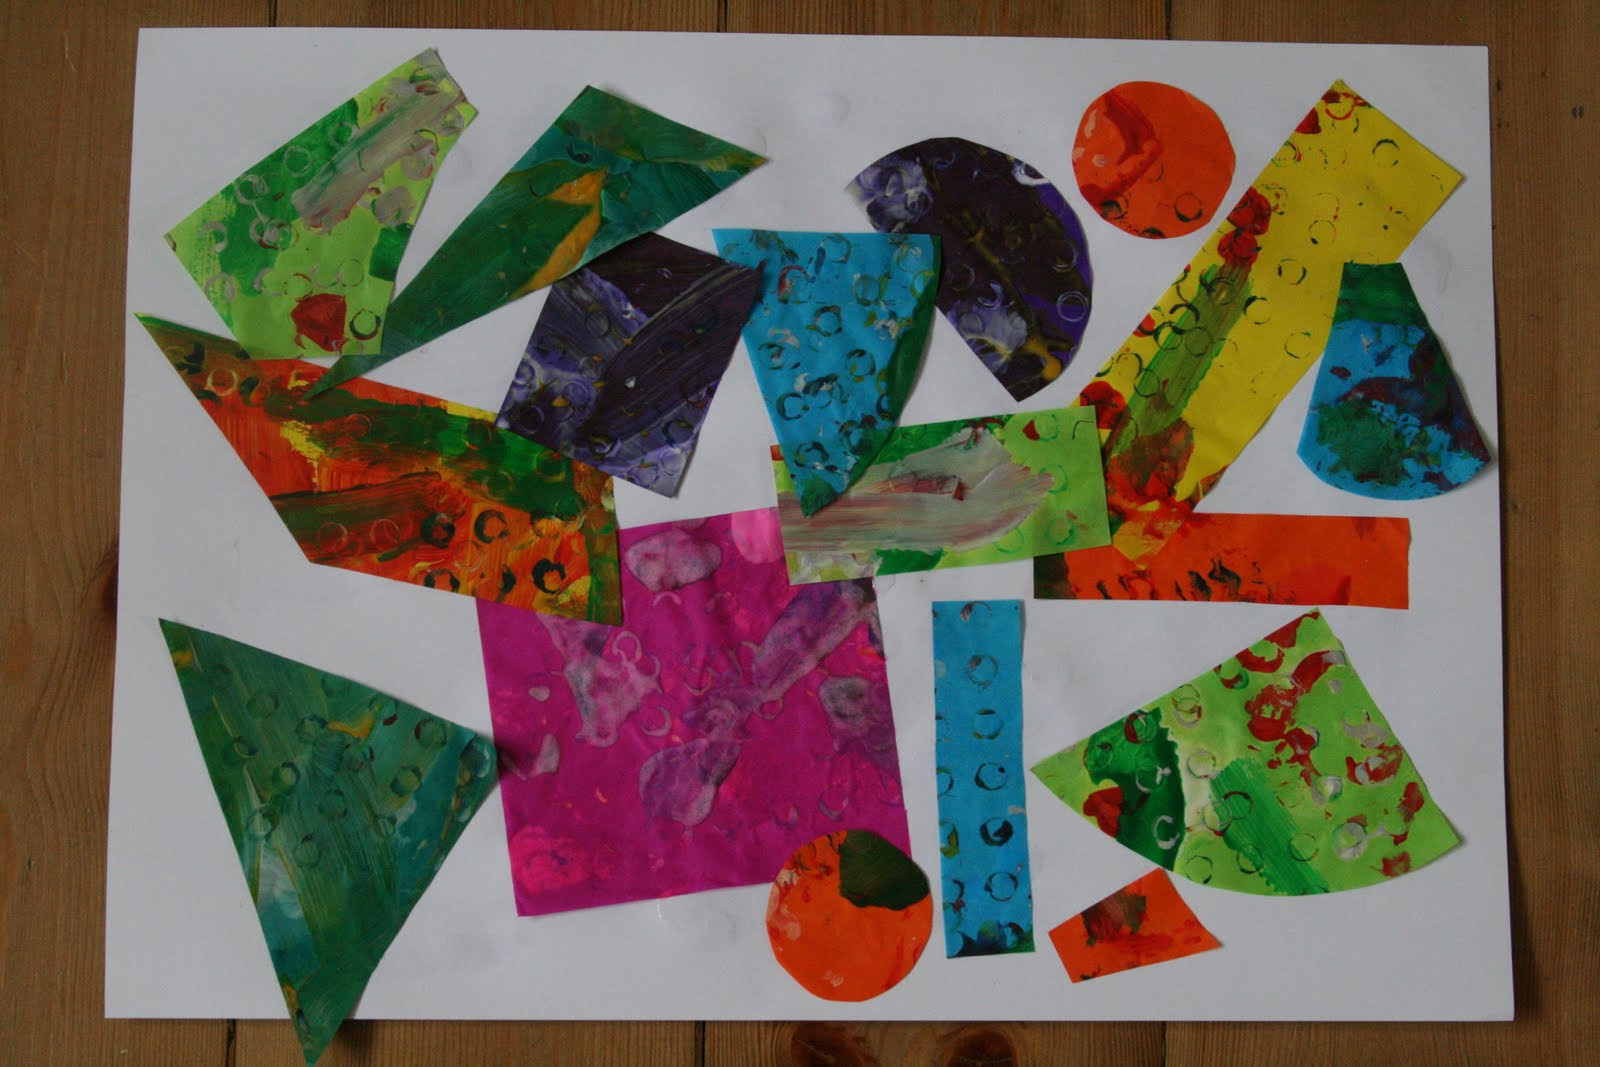 Creative Art Activities For Preschoolers
 Eric Carle Tissue Paper Prints The Imagination Tree